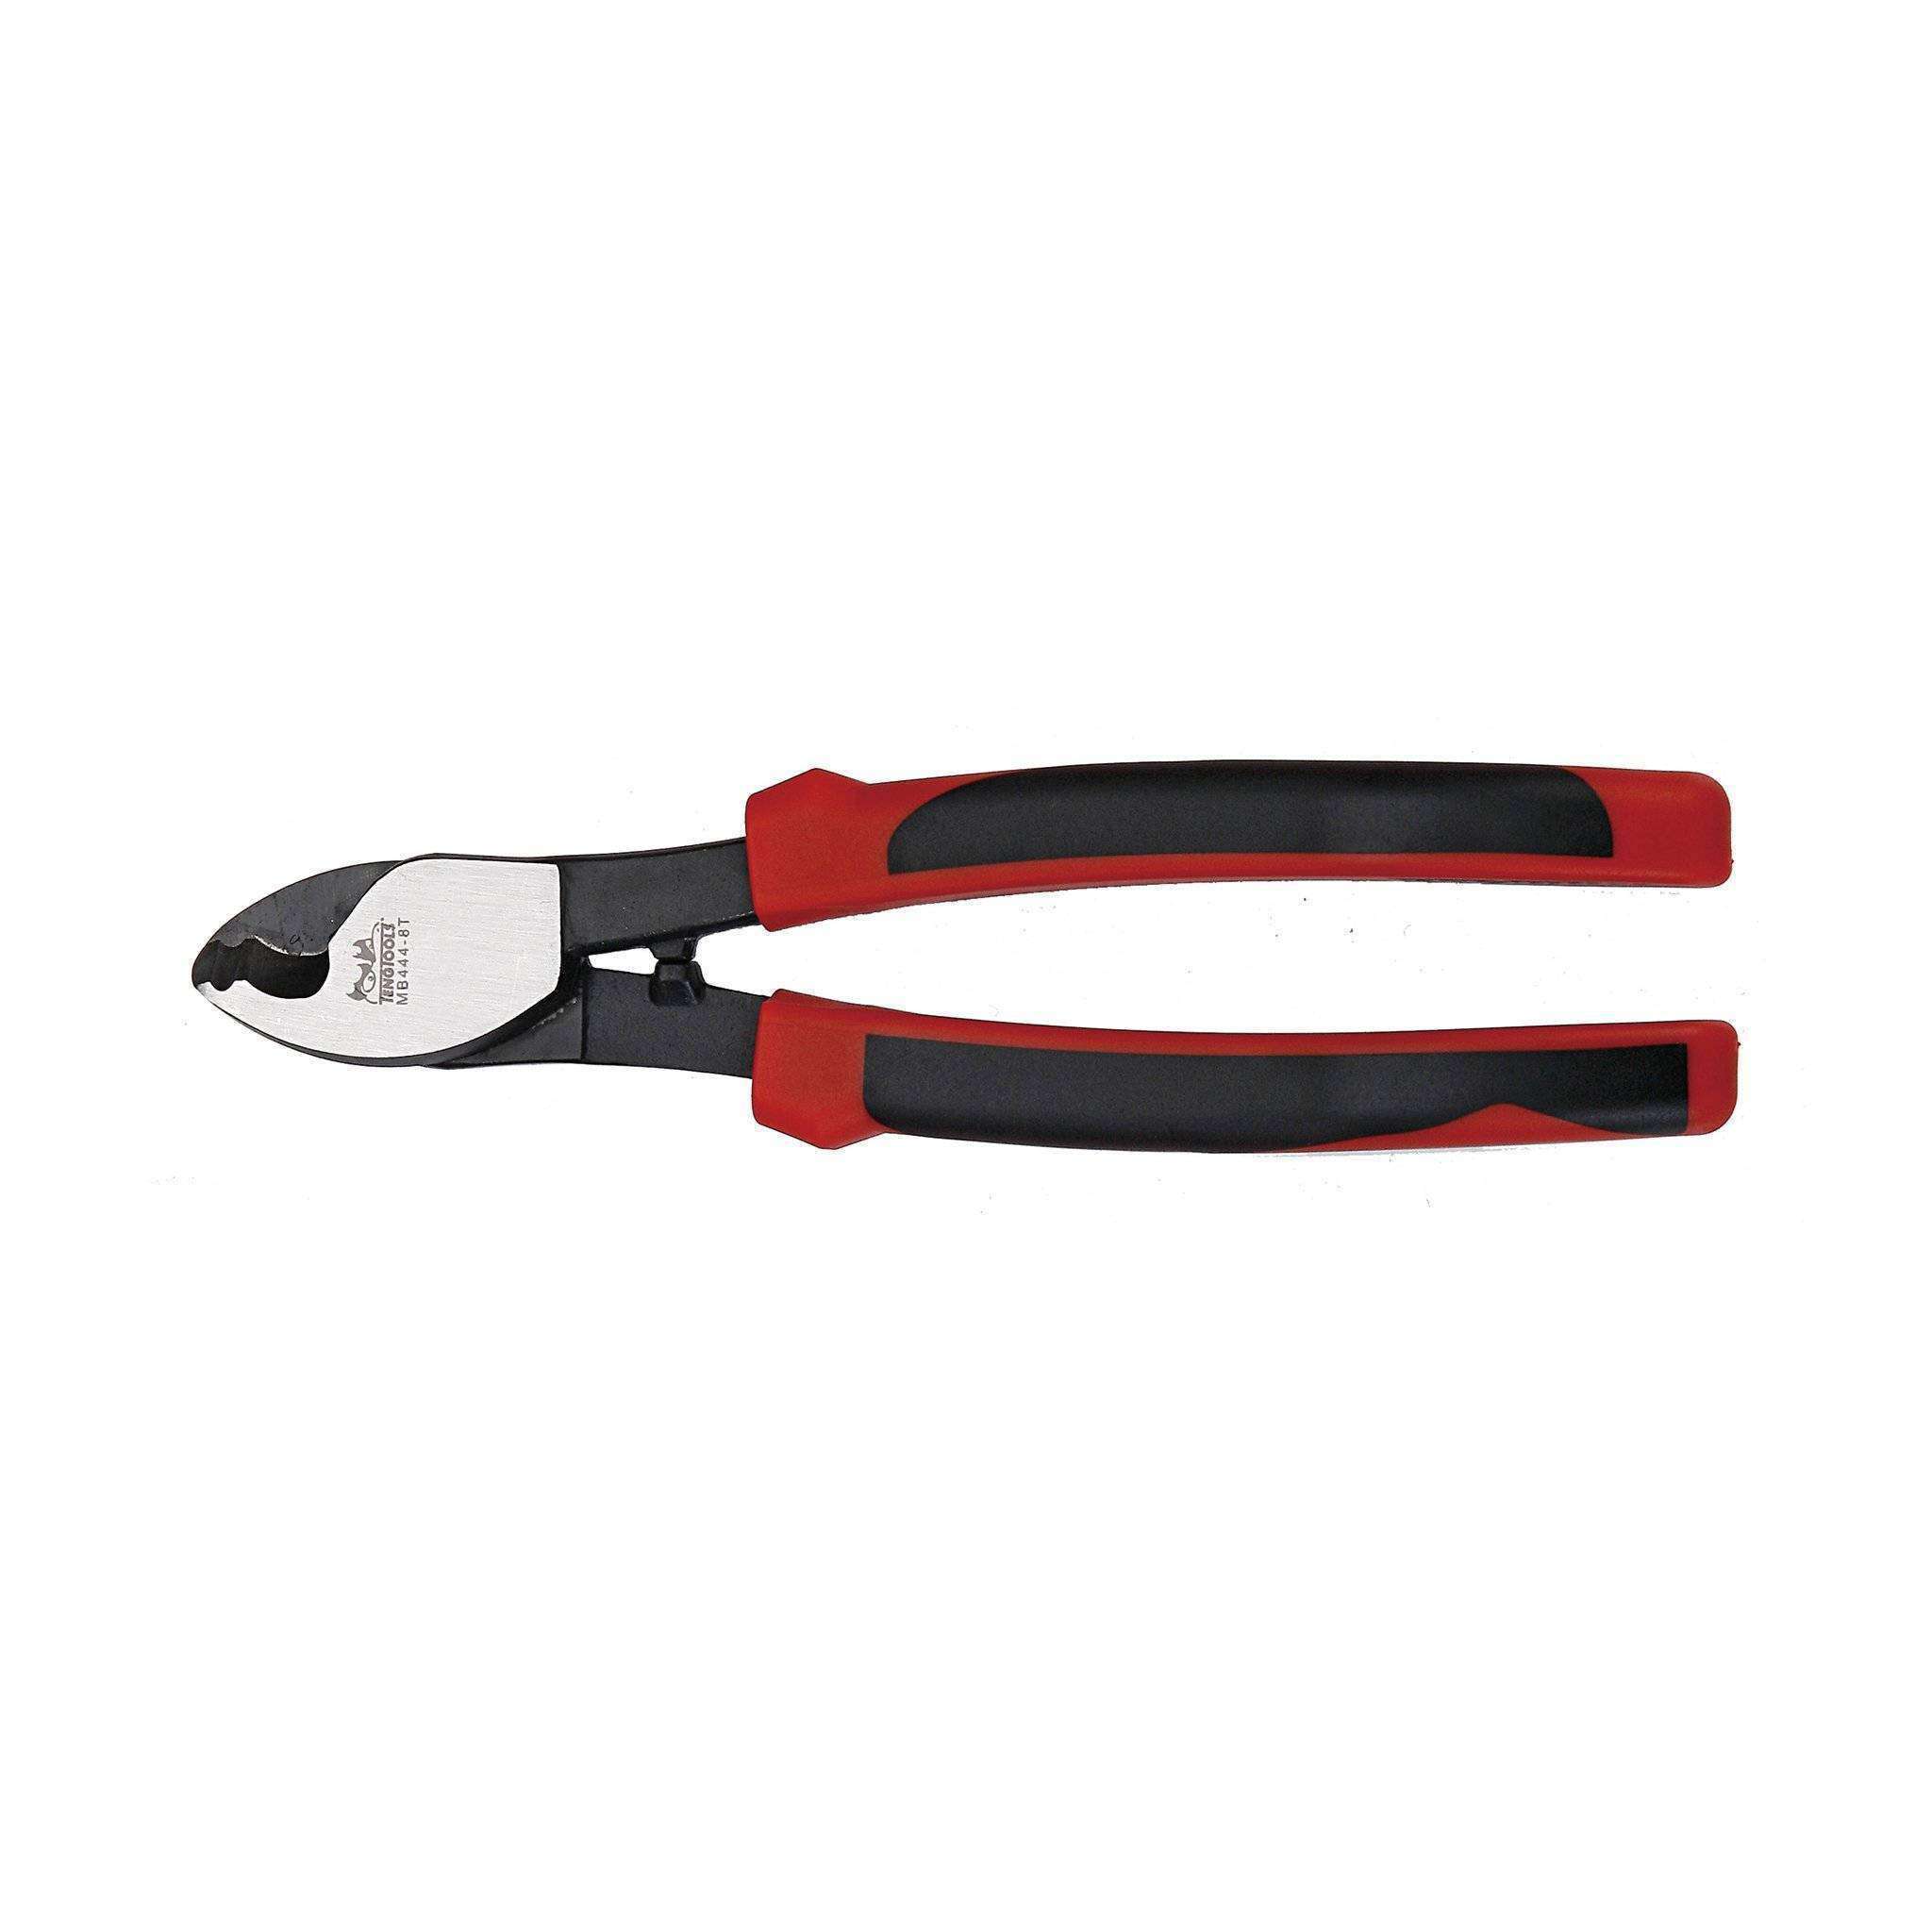 Teng Tools 8 Inch TPR Grip Handle Cable Cutters for Cutting Copper & Aluminum - MB444-8T